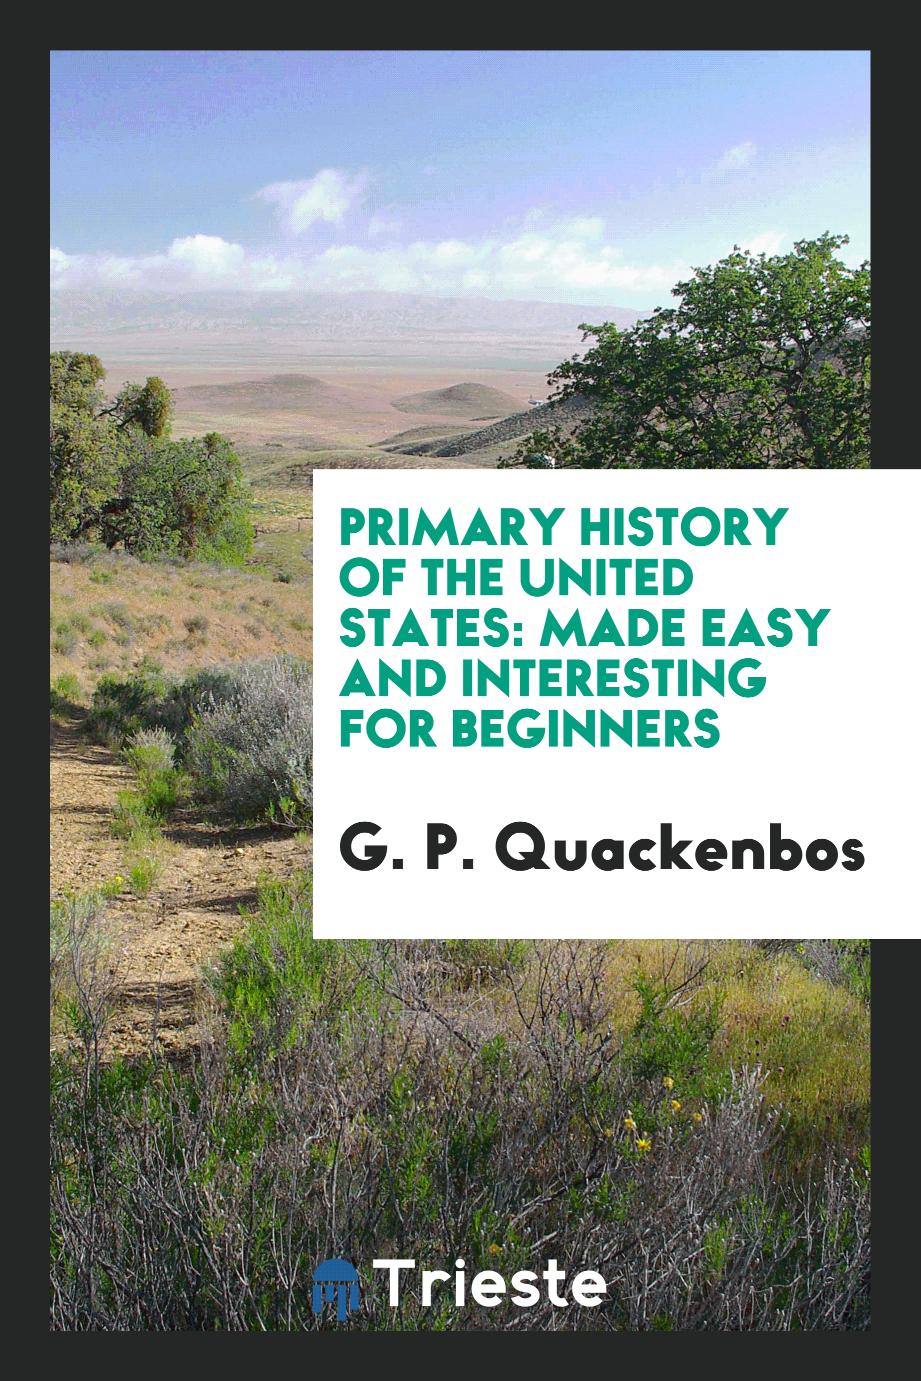 Primary History of the United States: Made Easy and Interesting for Beginners